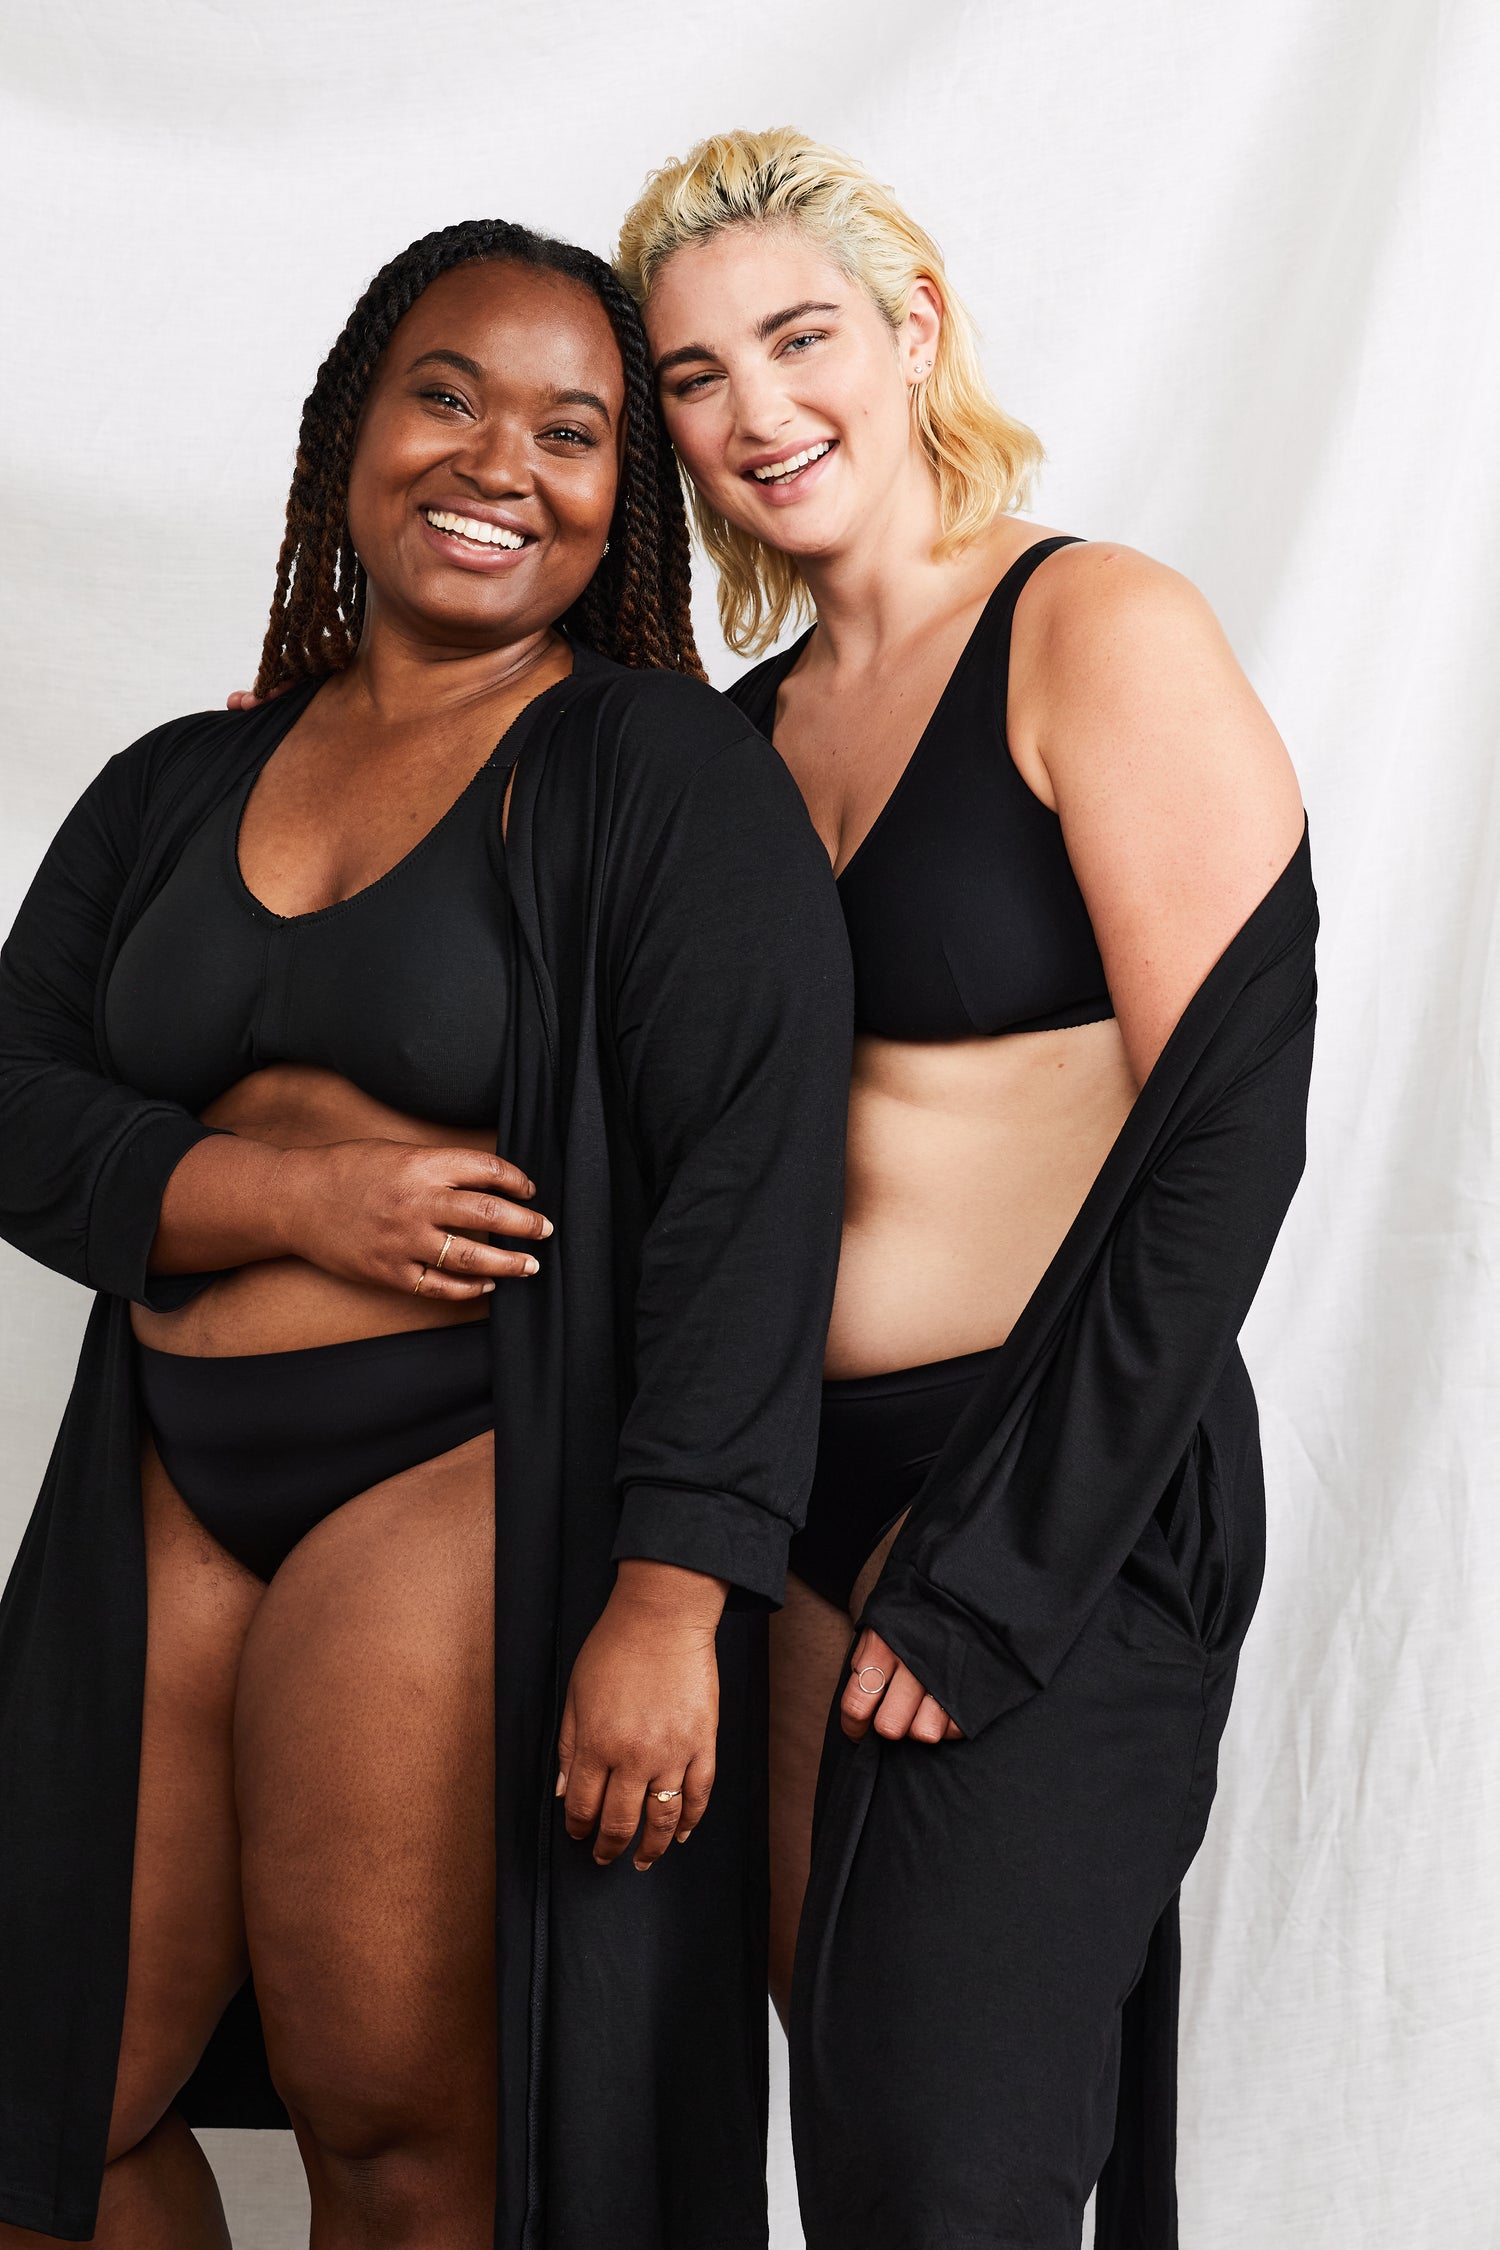 How Cherry Blossom Intimates Is Changing What It Looks Like to Be a Black  Woman in Tech.  Cherry Blossom Intimates is helping breast cancer  survivors shop for prosthetics with dignity. In